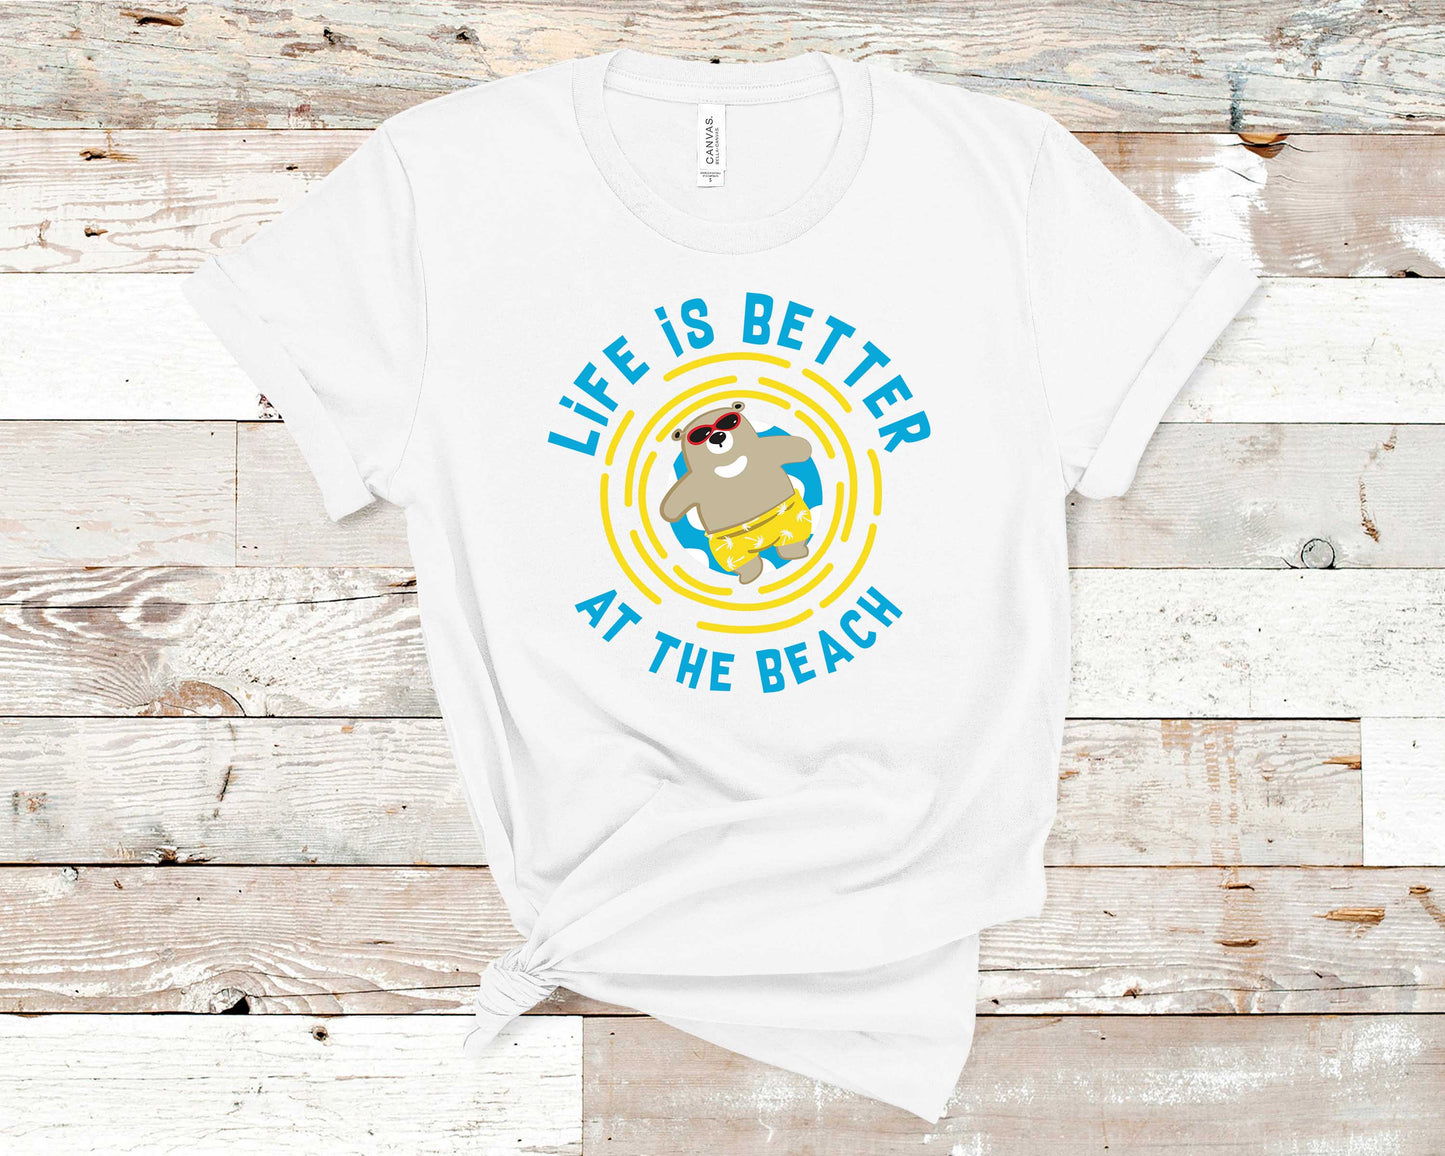 Life Is Better At the Beach - Travel/Vacation